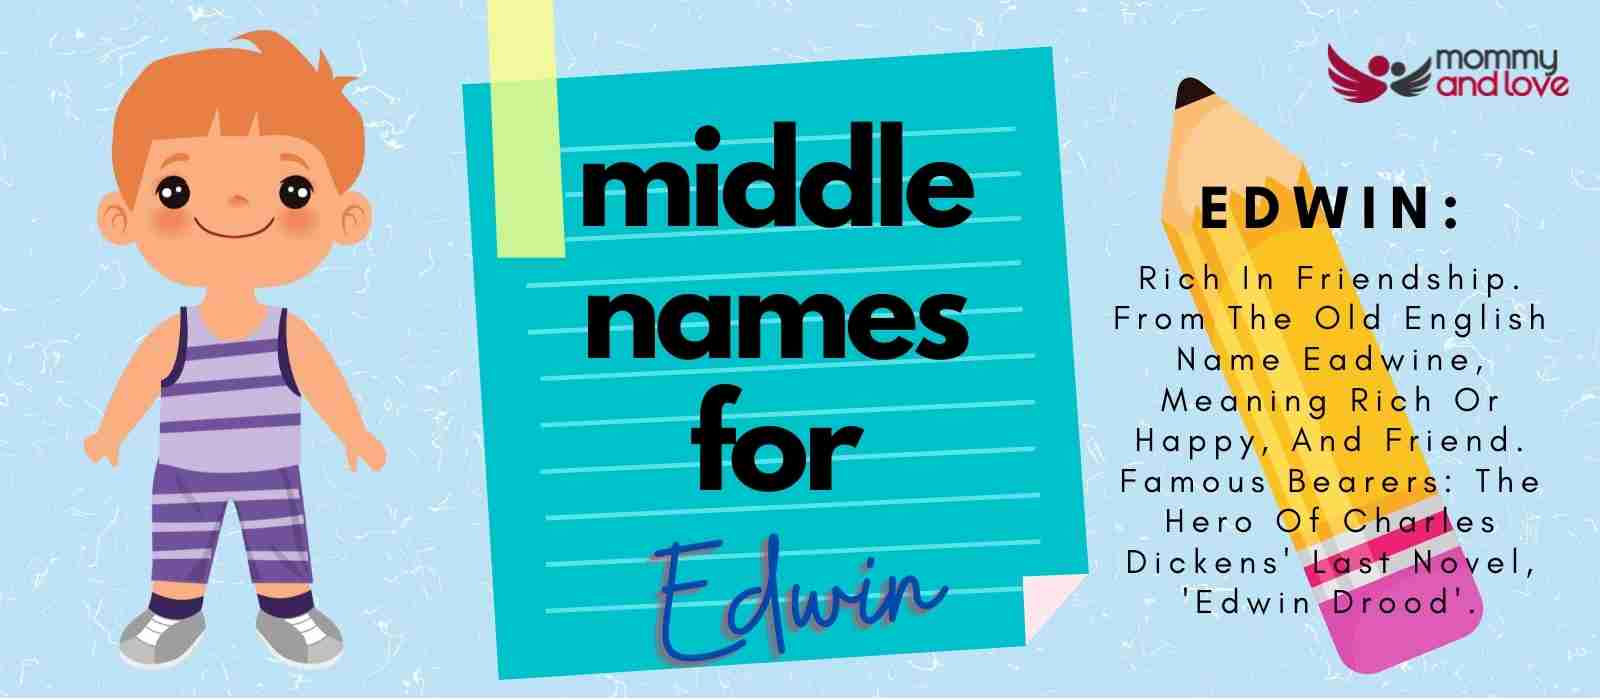 Middle Names for Edwin